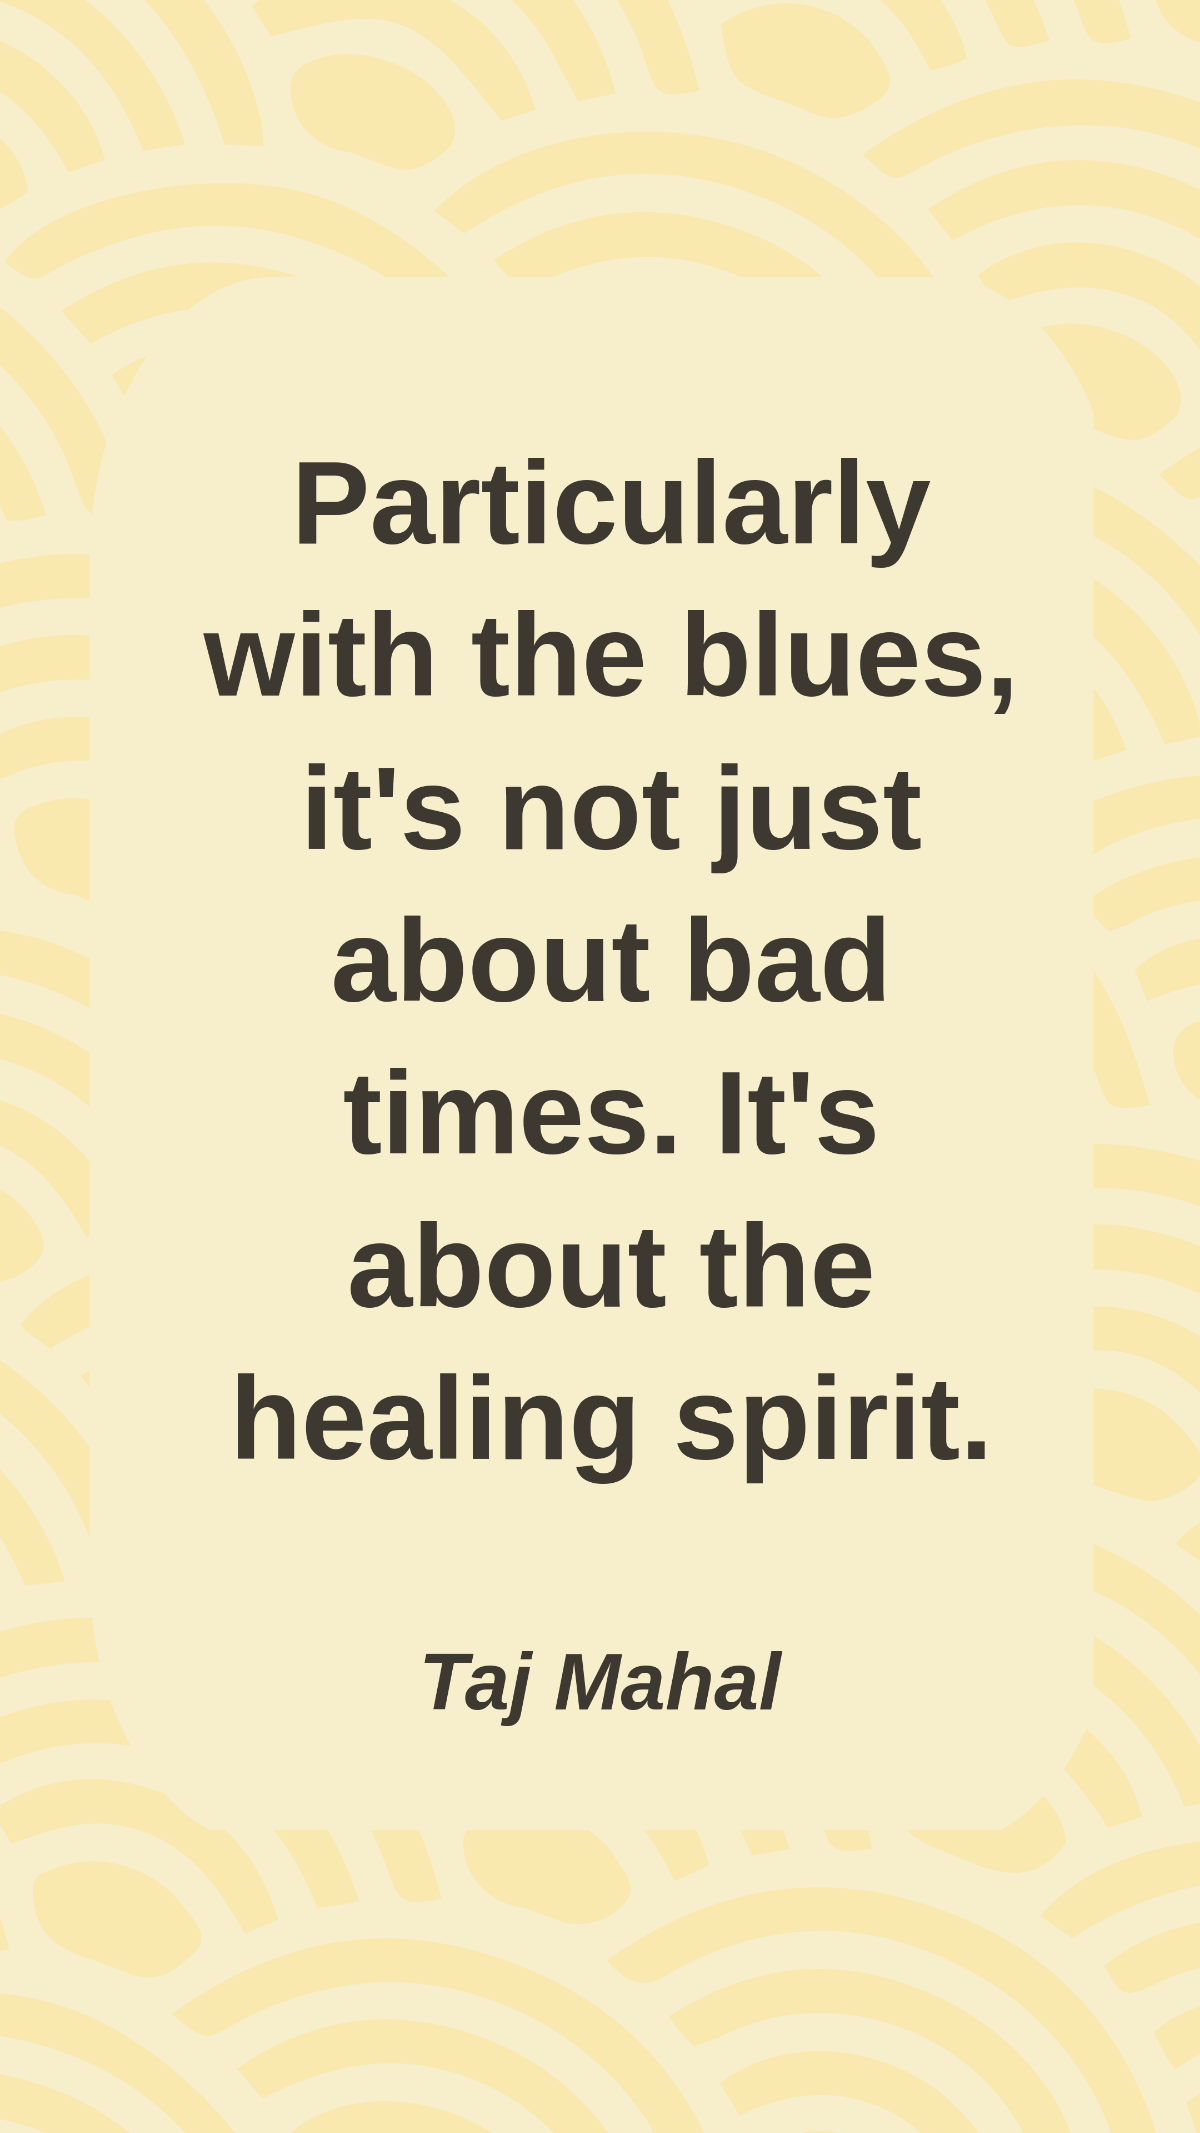 Taj Mahal - Particularly with the blues, it's not just about bad times. It's about the healing spirit.